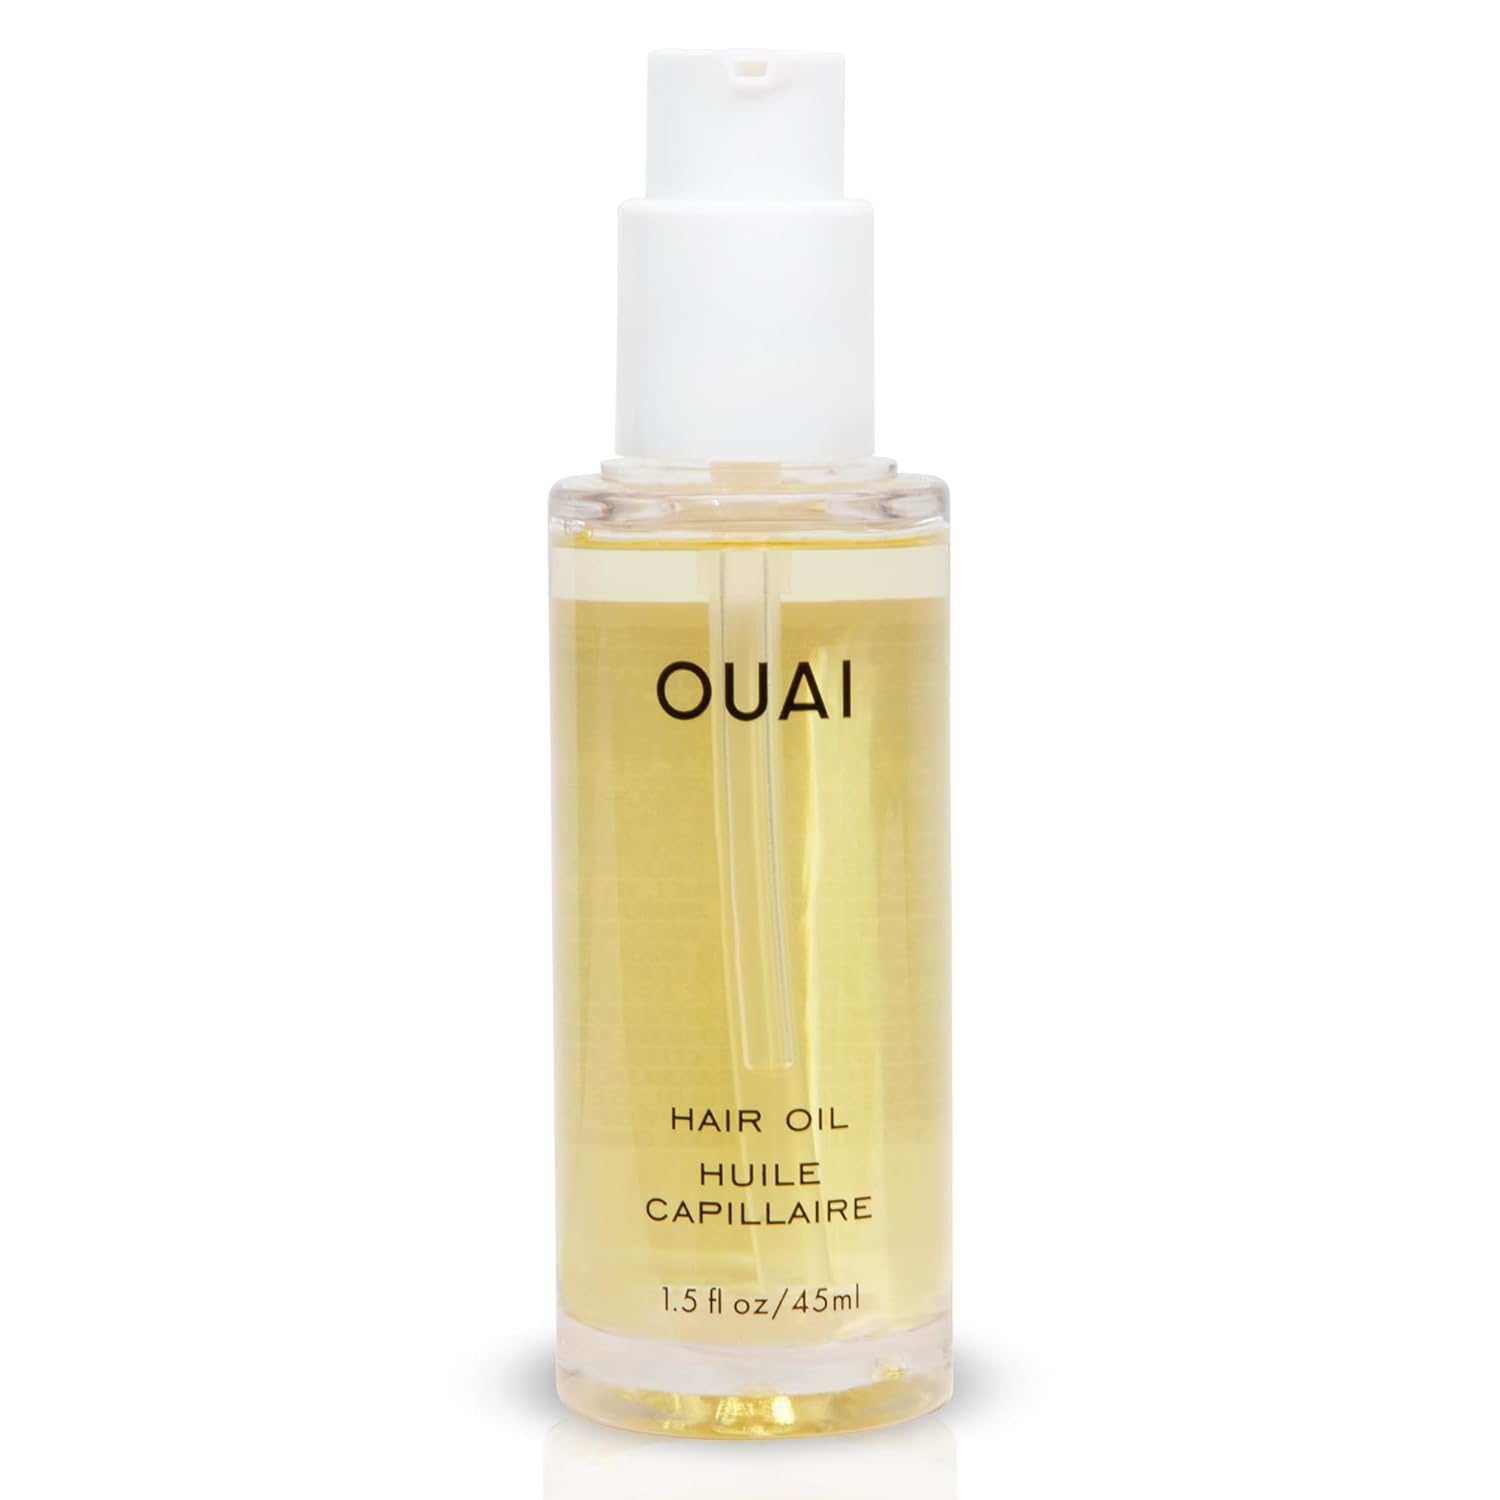 OUAI Hair Oil - Hair Heat Protectant Oil for Frizz Control - Adds Hair Shine and Smooths Split Ends - Color Safe Formula